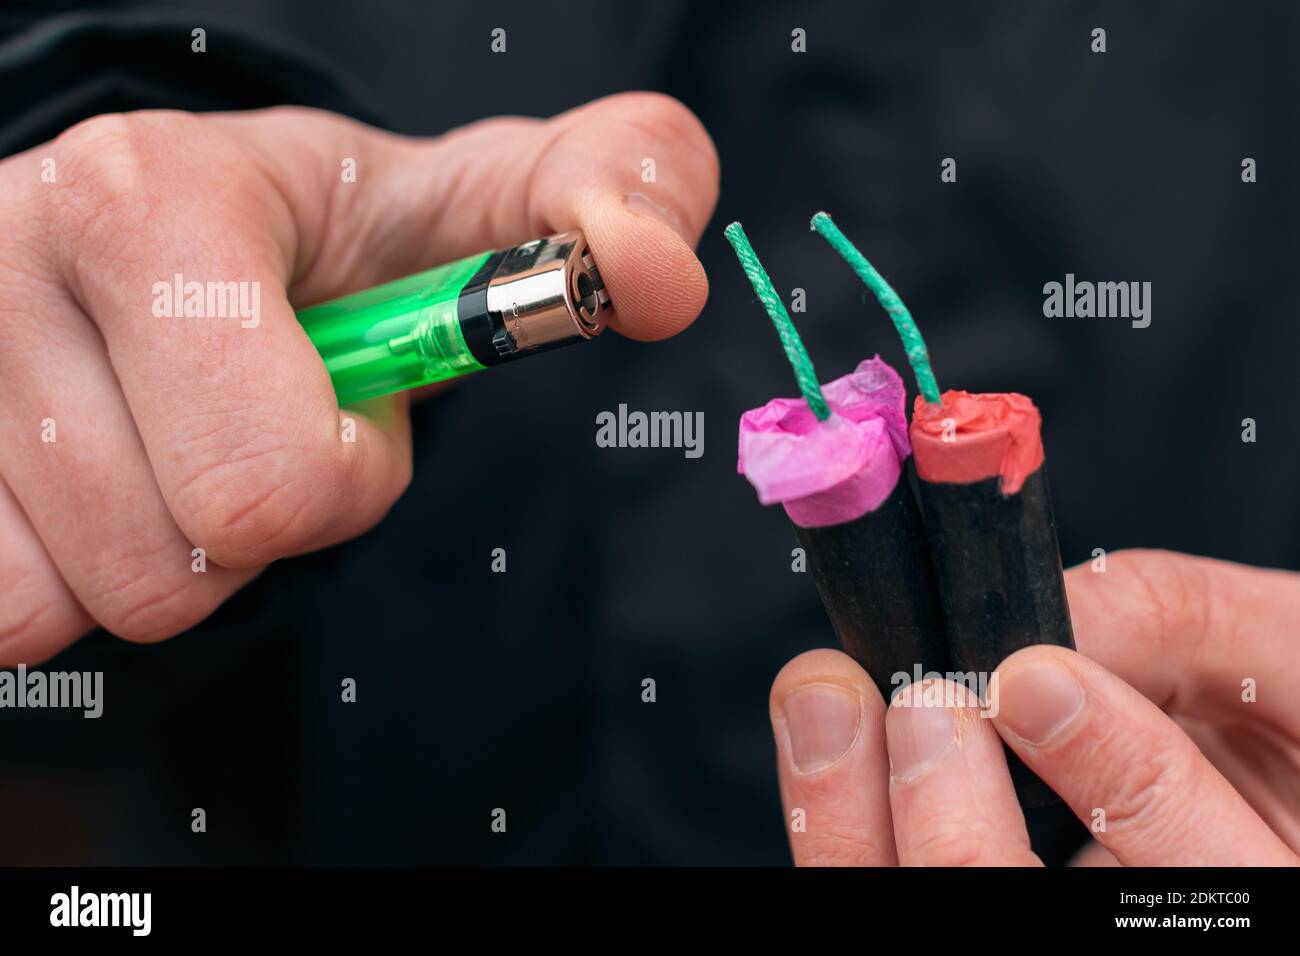 Setting Fire to the several Firecrackers. Man in Black Clothes Lighting Up Two Petards at the Same Time. Firing Up the Pyrotechnic with Green Gas Lighter Outdoors Stock Photo